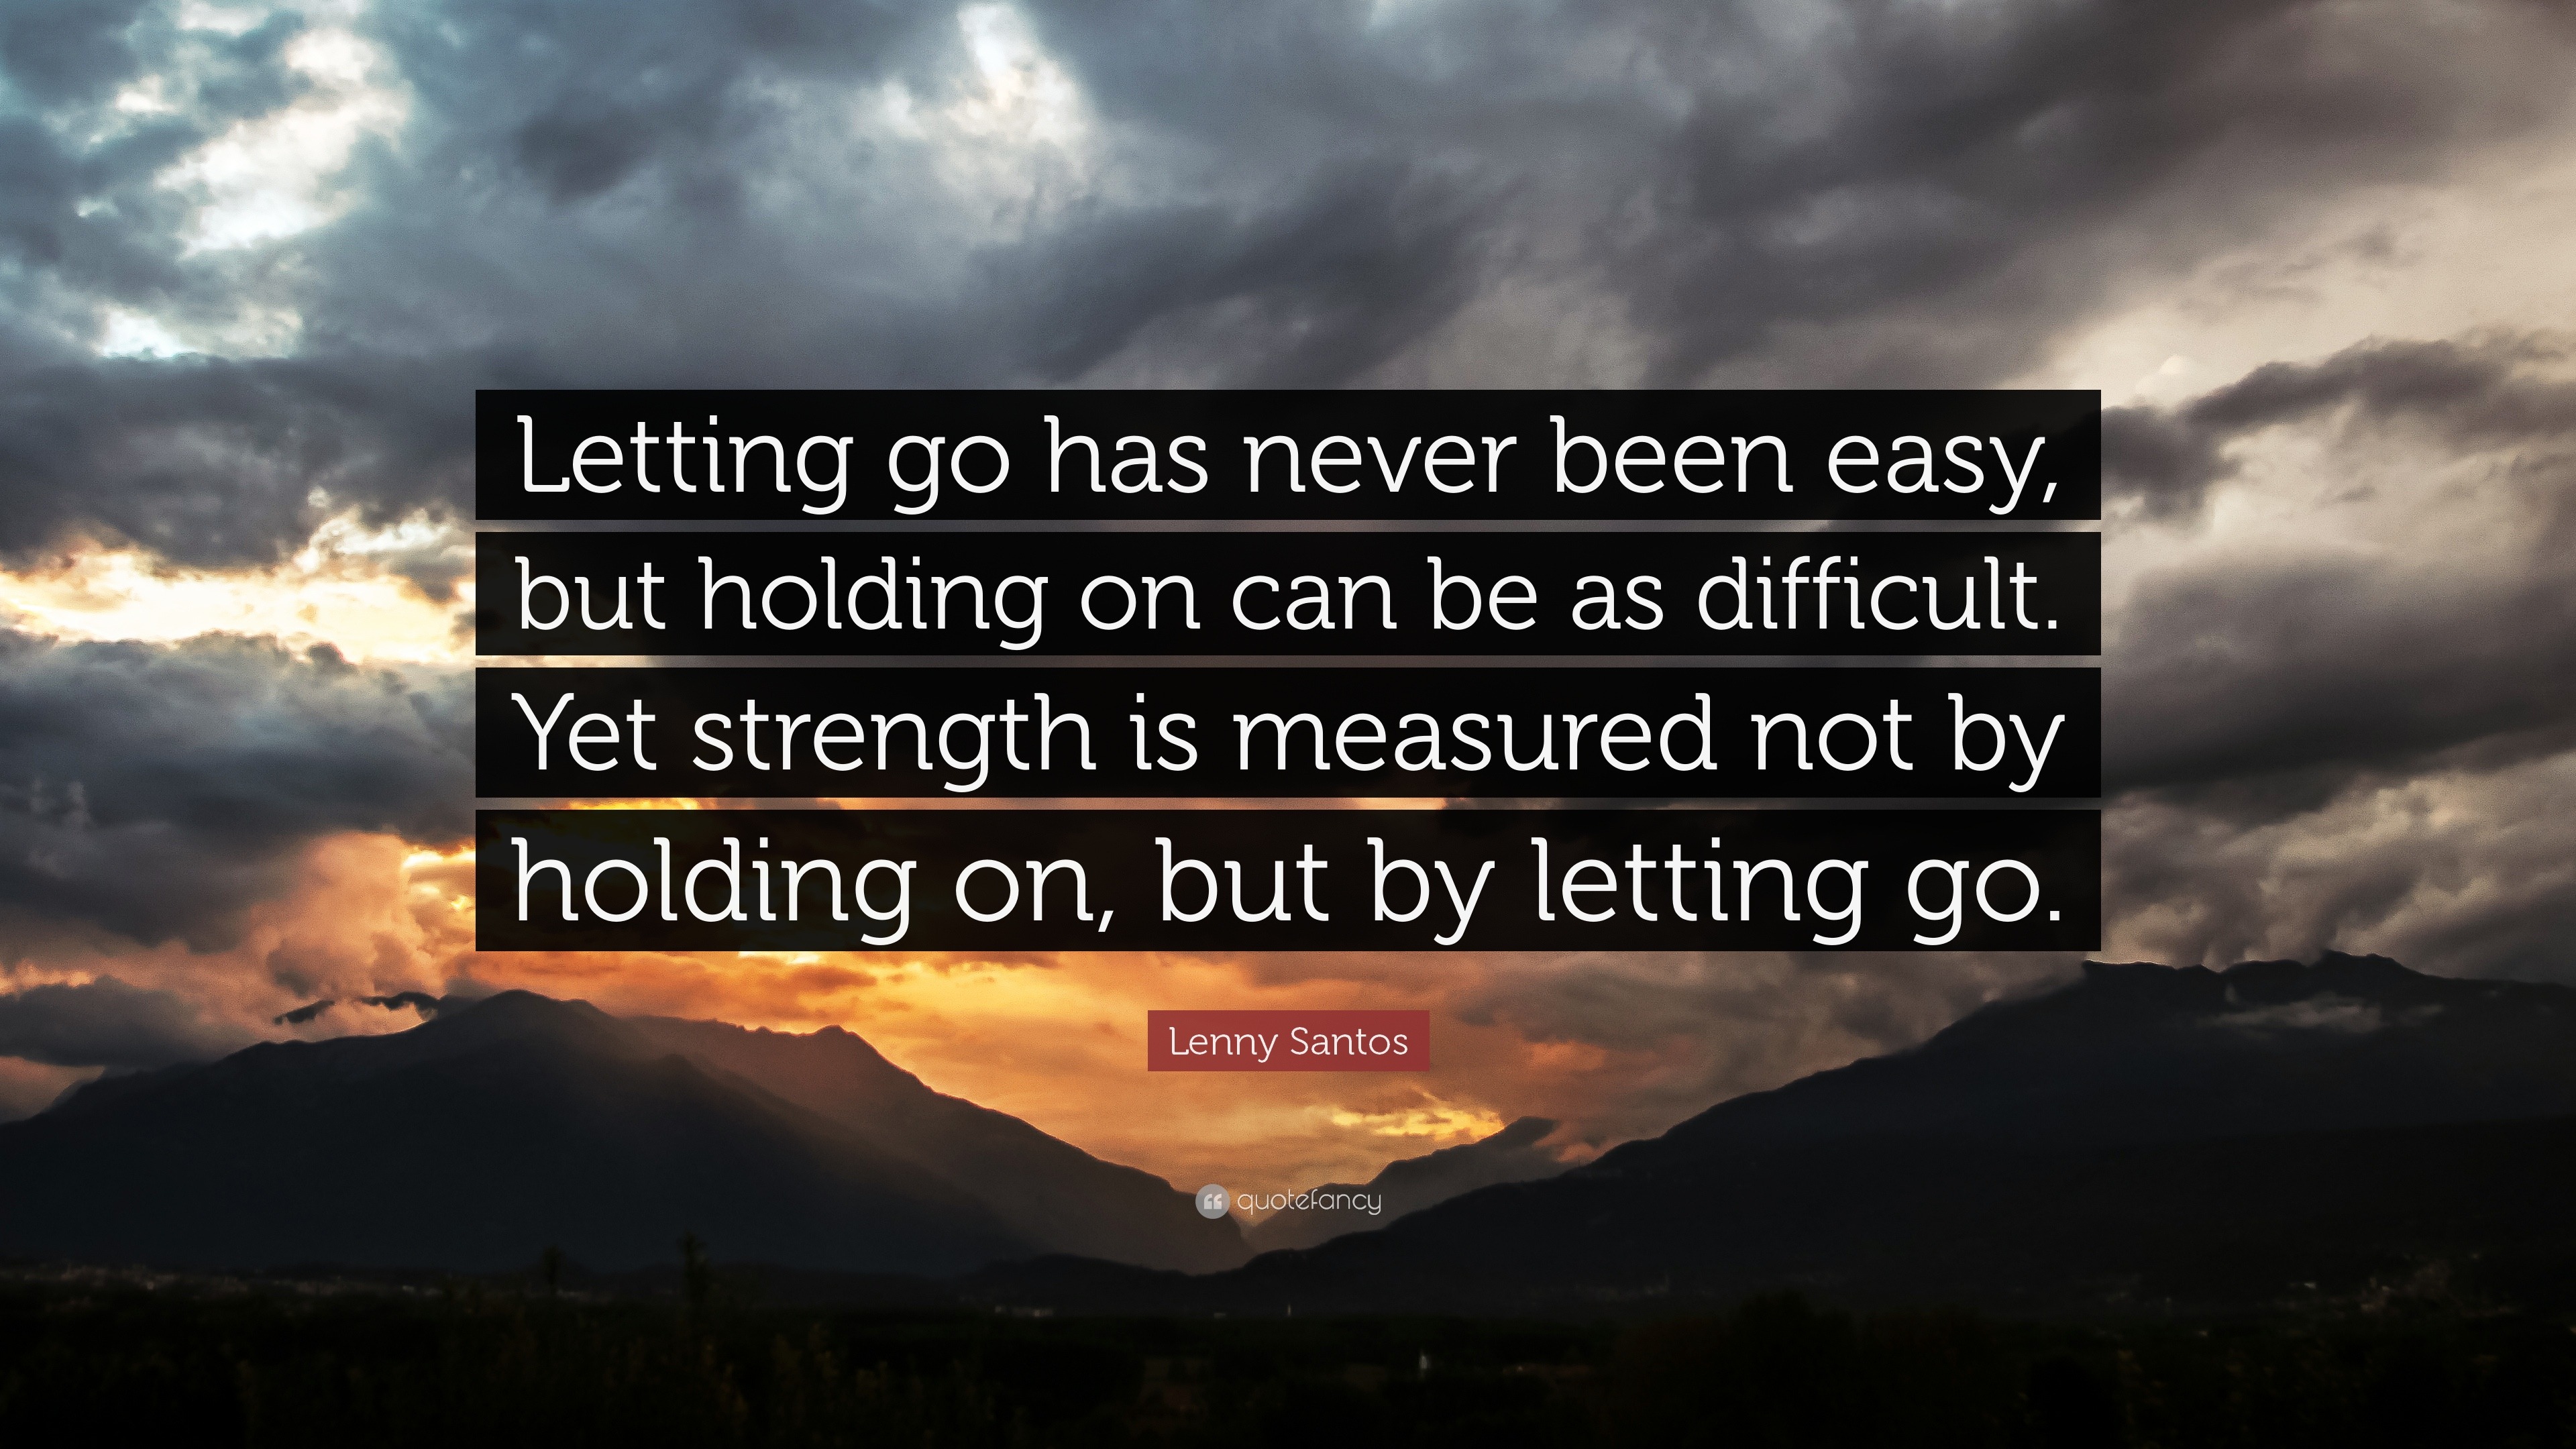 Lenny Santos Quote: “Letting go has never been easy, but holding on can ...